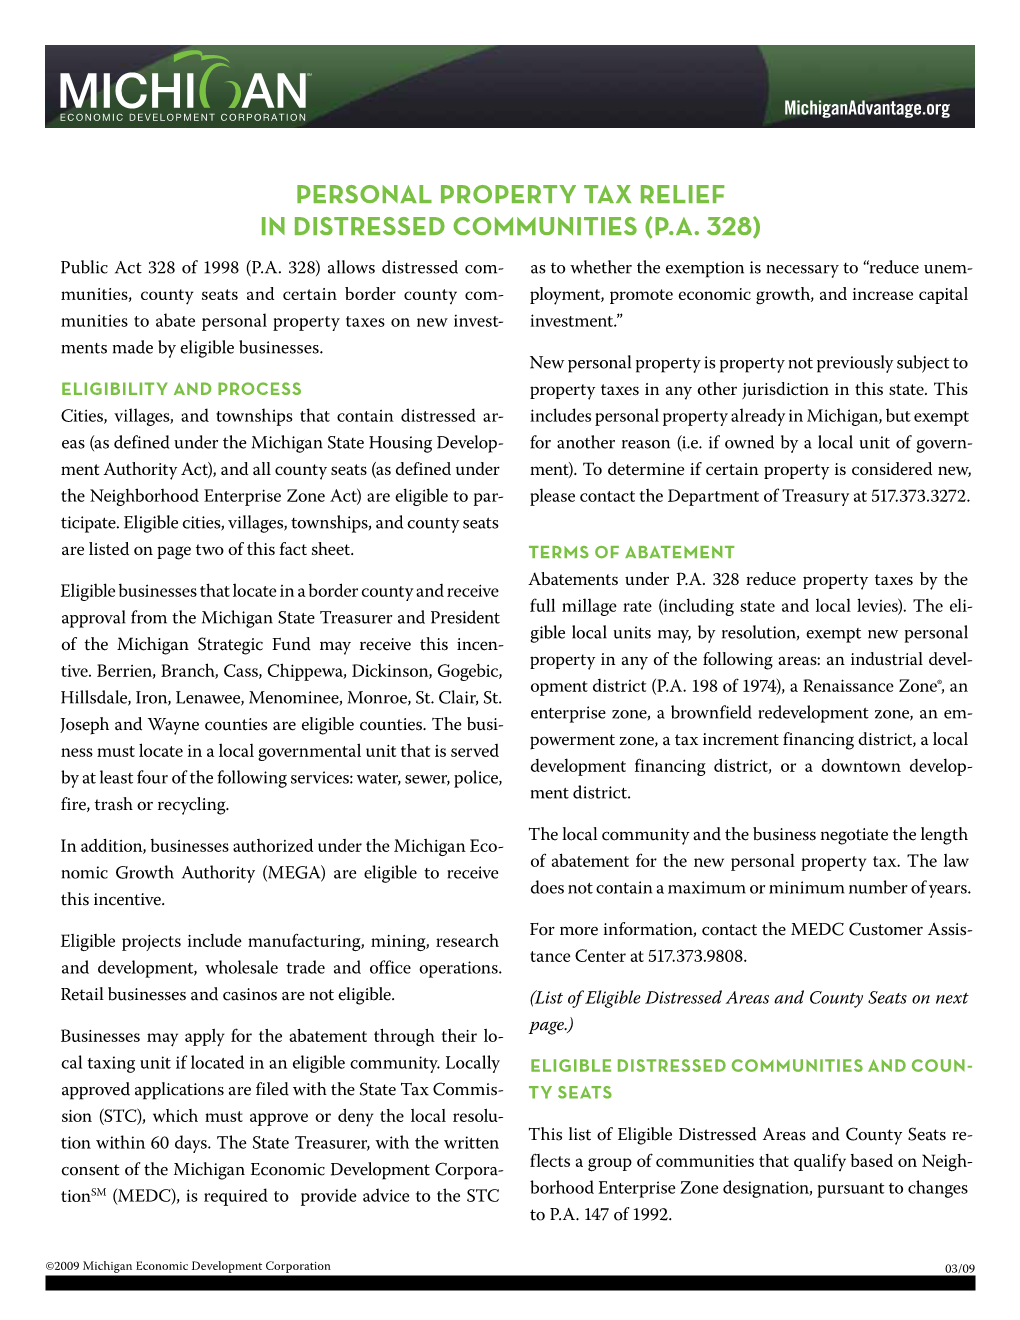 Personal Property Tax Relief in Distressed Communities (P.A